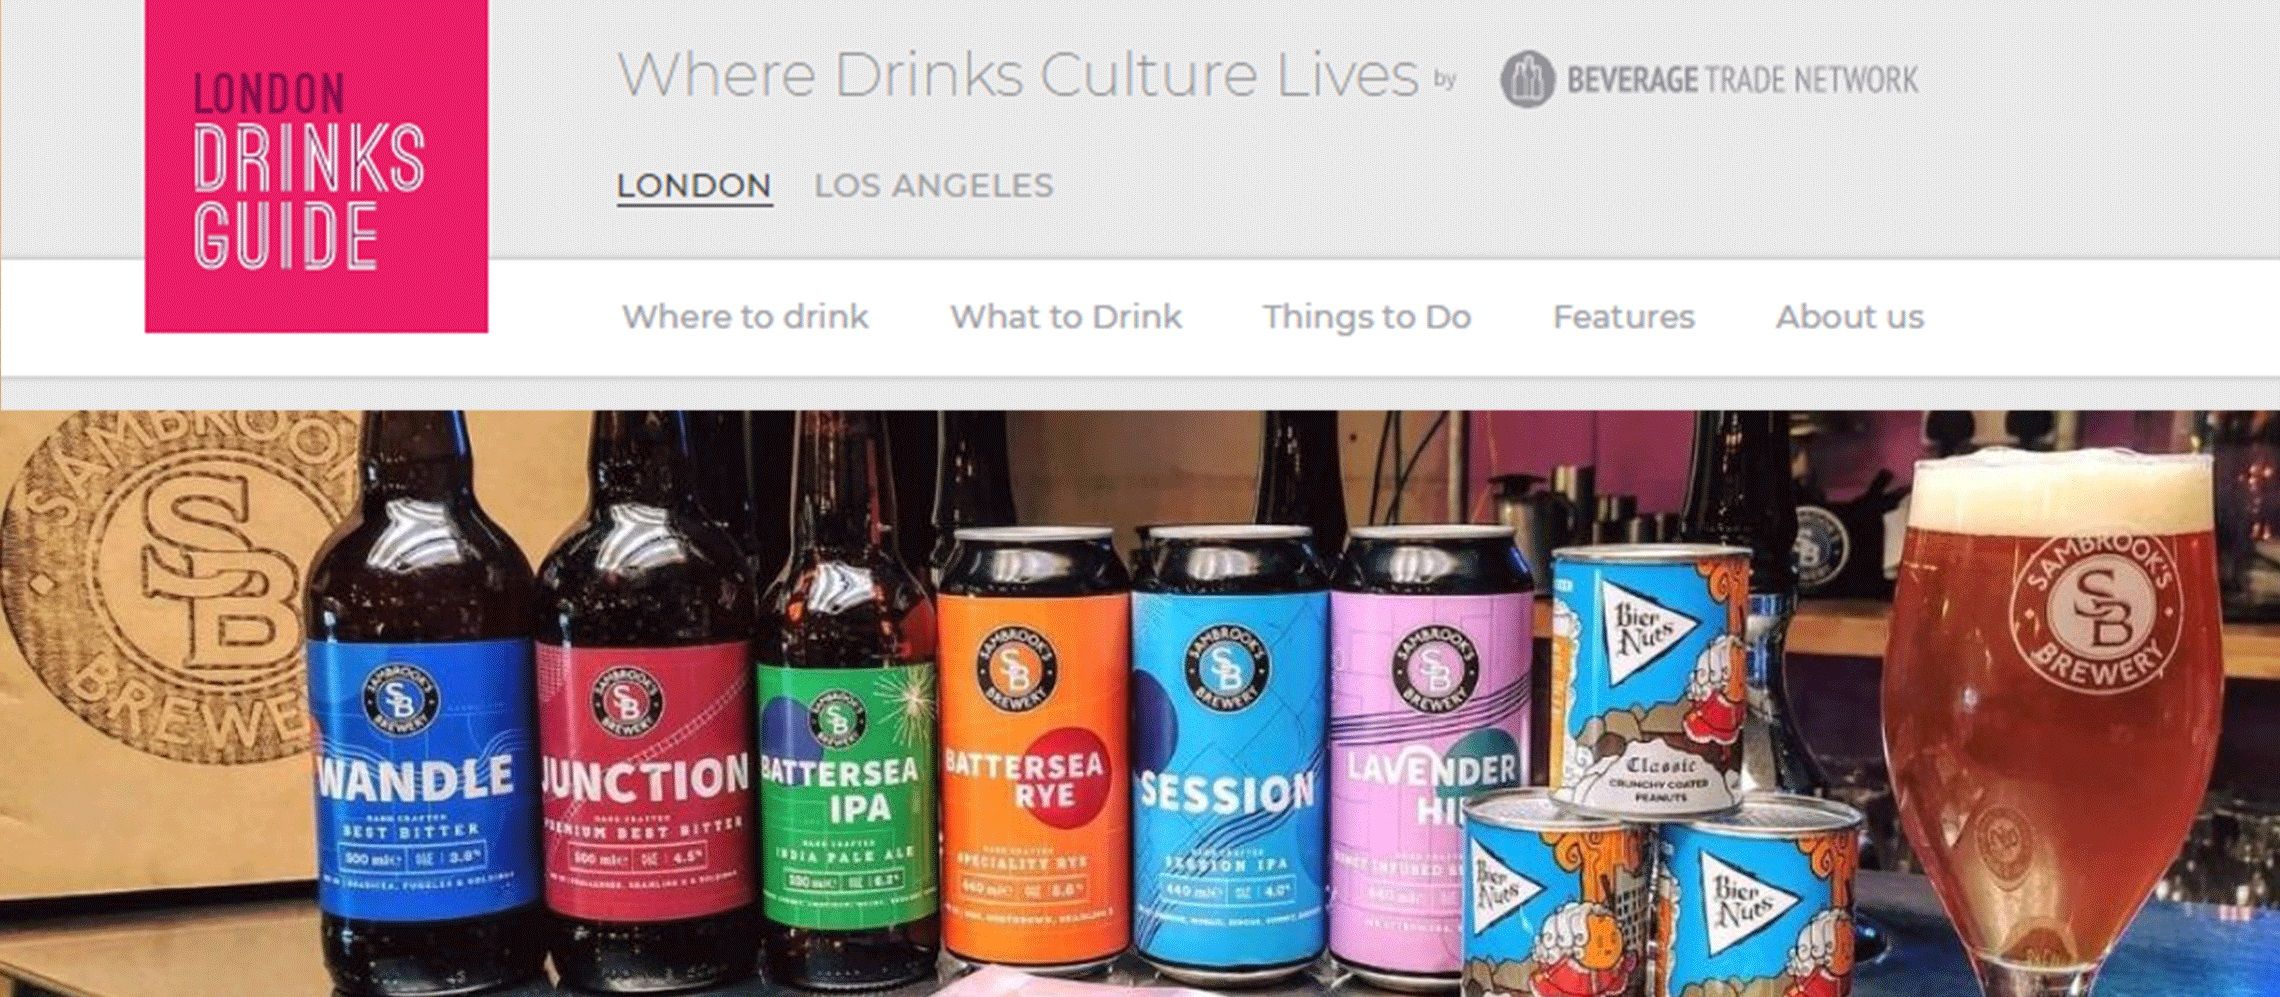 Photo for: Dive Into London’s Brewing Tradition With Sambrook's Brewery